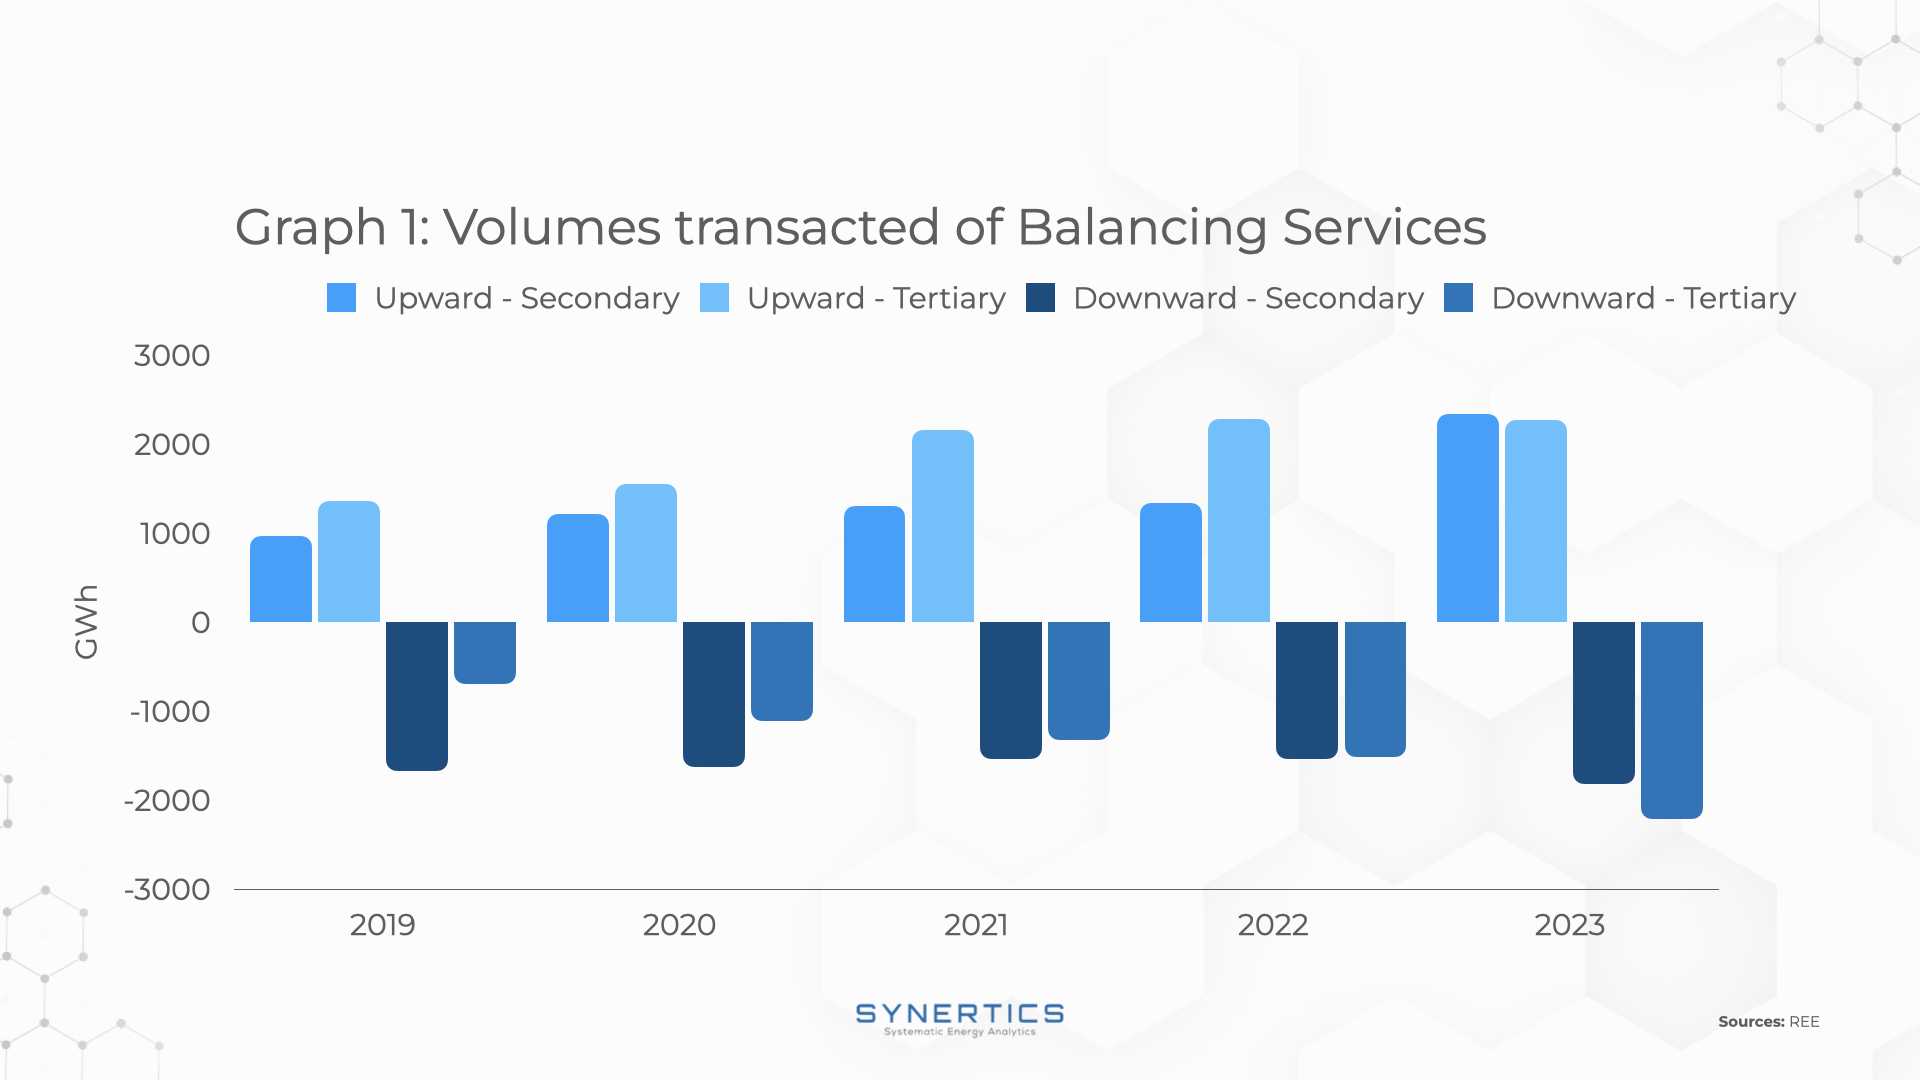 Balancing Services in Spain